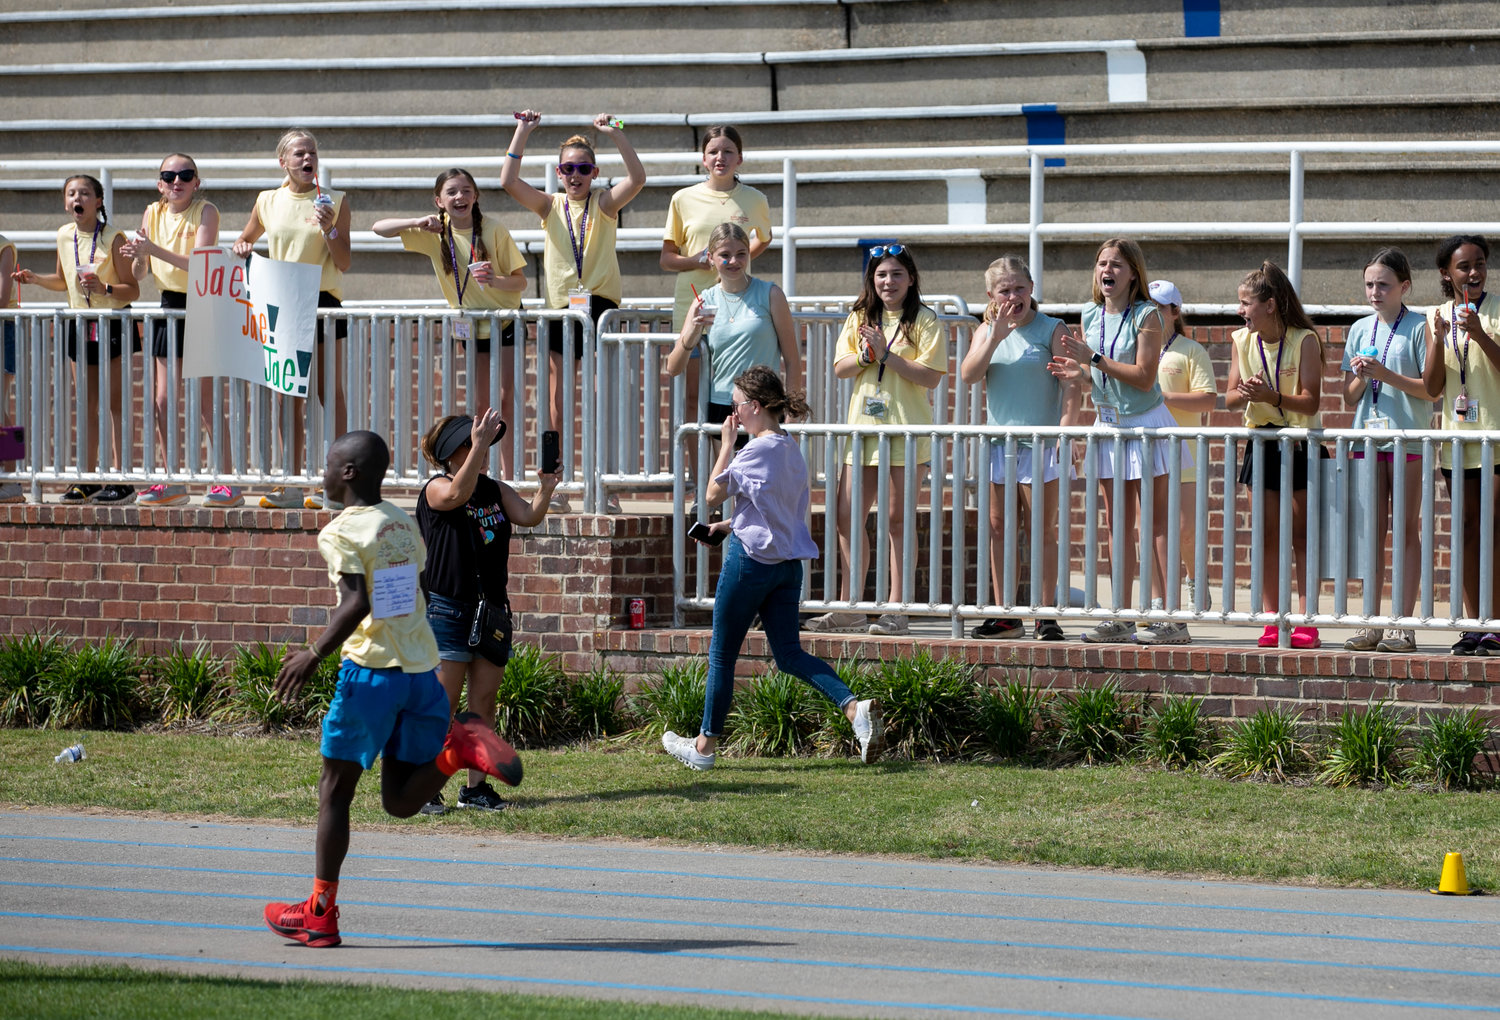 Jackson Johnson is cheered on by his classmates from Daphne East Elementary School during a running event at the Baldwin County Spring Games Thursday, April 6, at Fairhope Municipal Stadium.